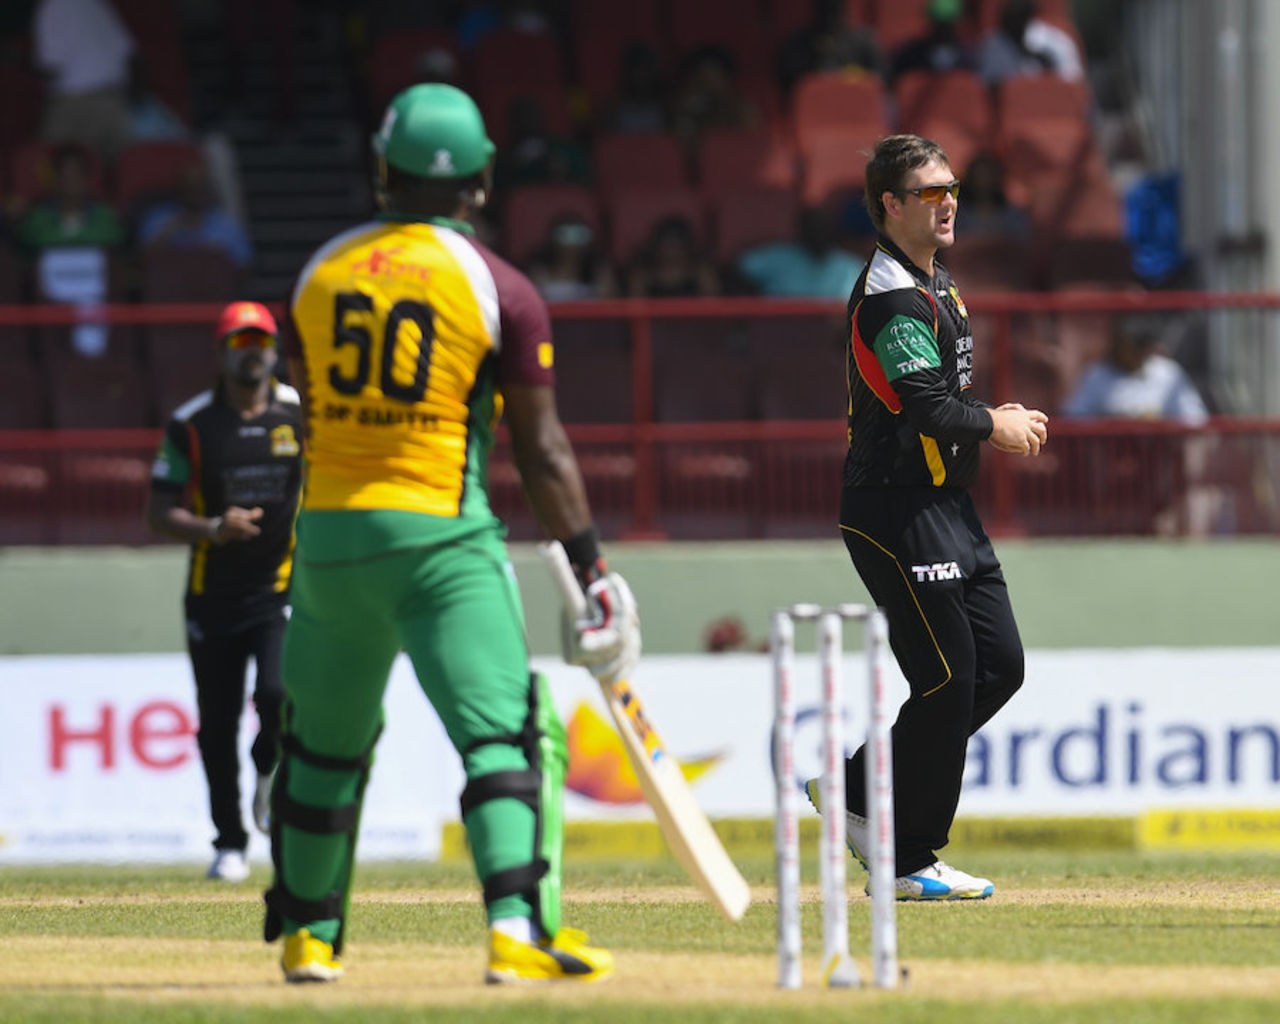 JJ Smuts took a return catch to dismiss Dwayne Smith cheaply, Guyana Amazon Warriors v St Kitts and Nevis Patriots, CPL 2016, Providence, July 9, 2016